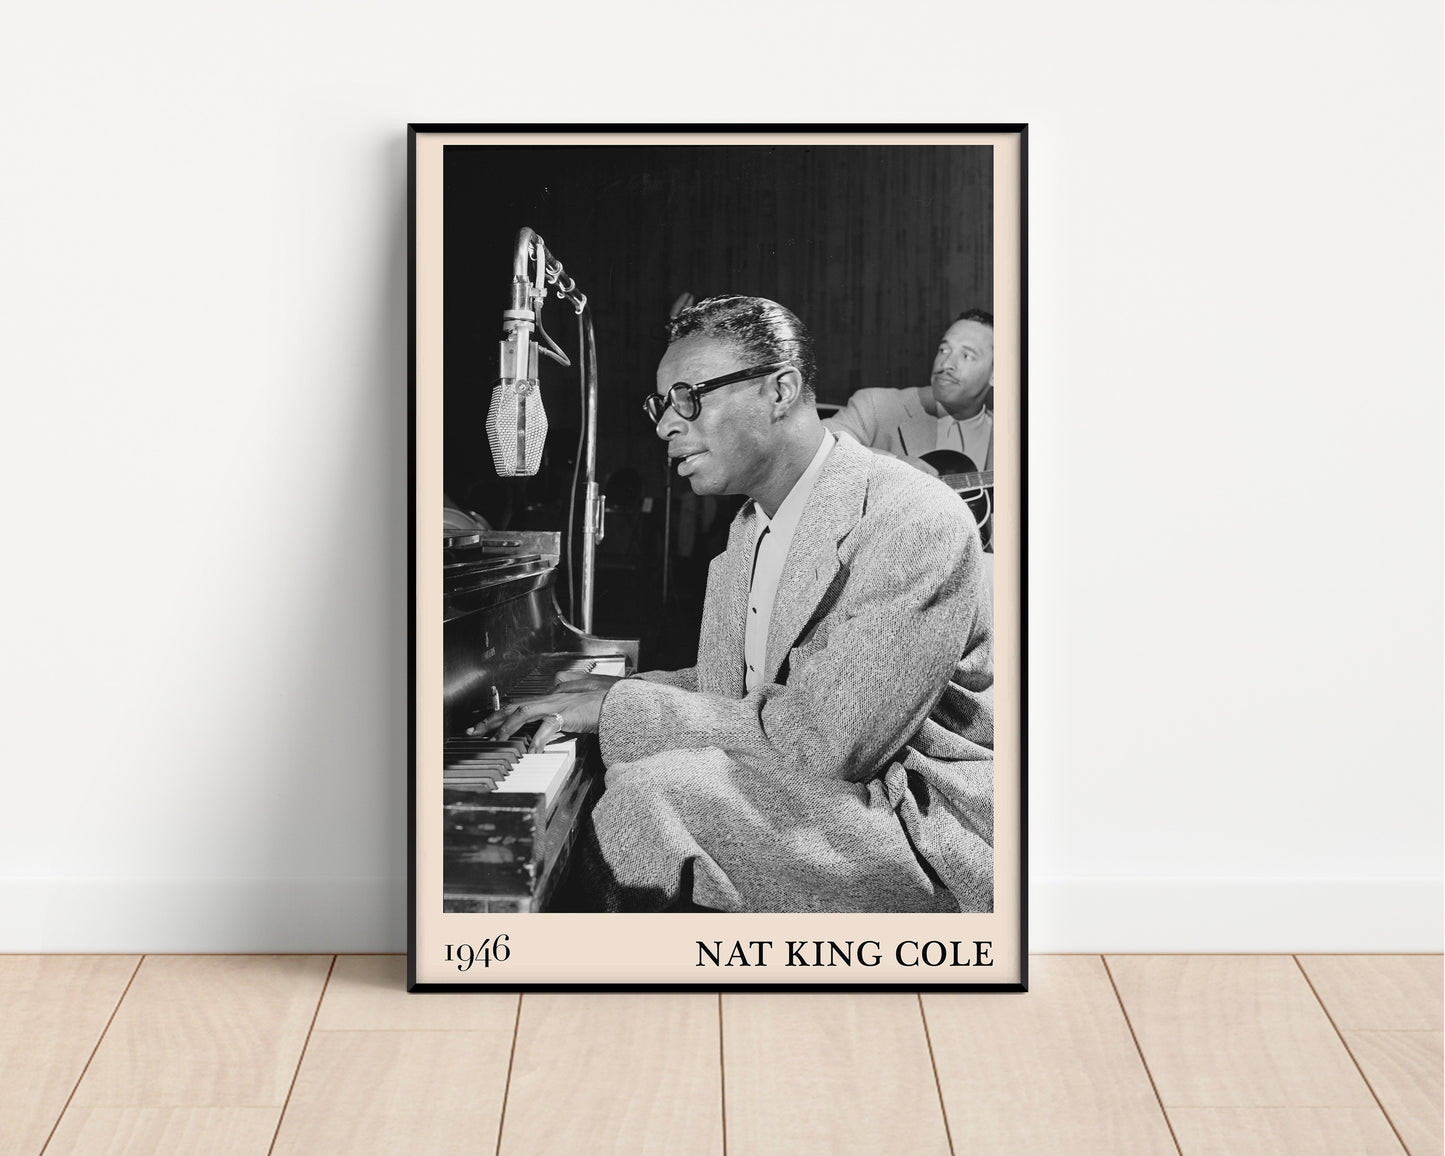 1946 picture of Nat King Cole playing a piano and singing. Picture crafted into a black framed poster, with an off-white border. Poster is propped against a white wall